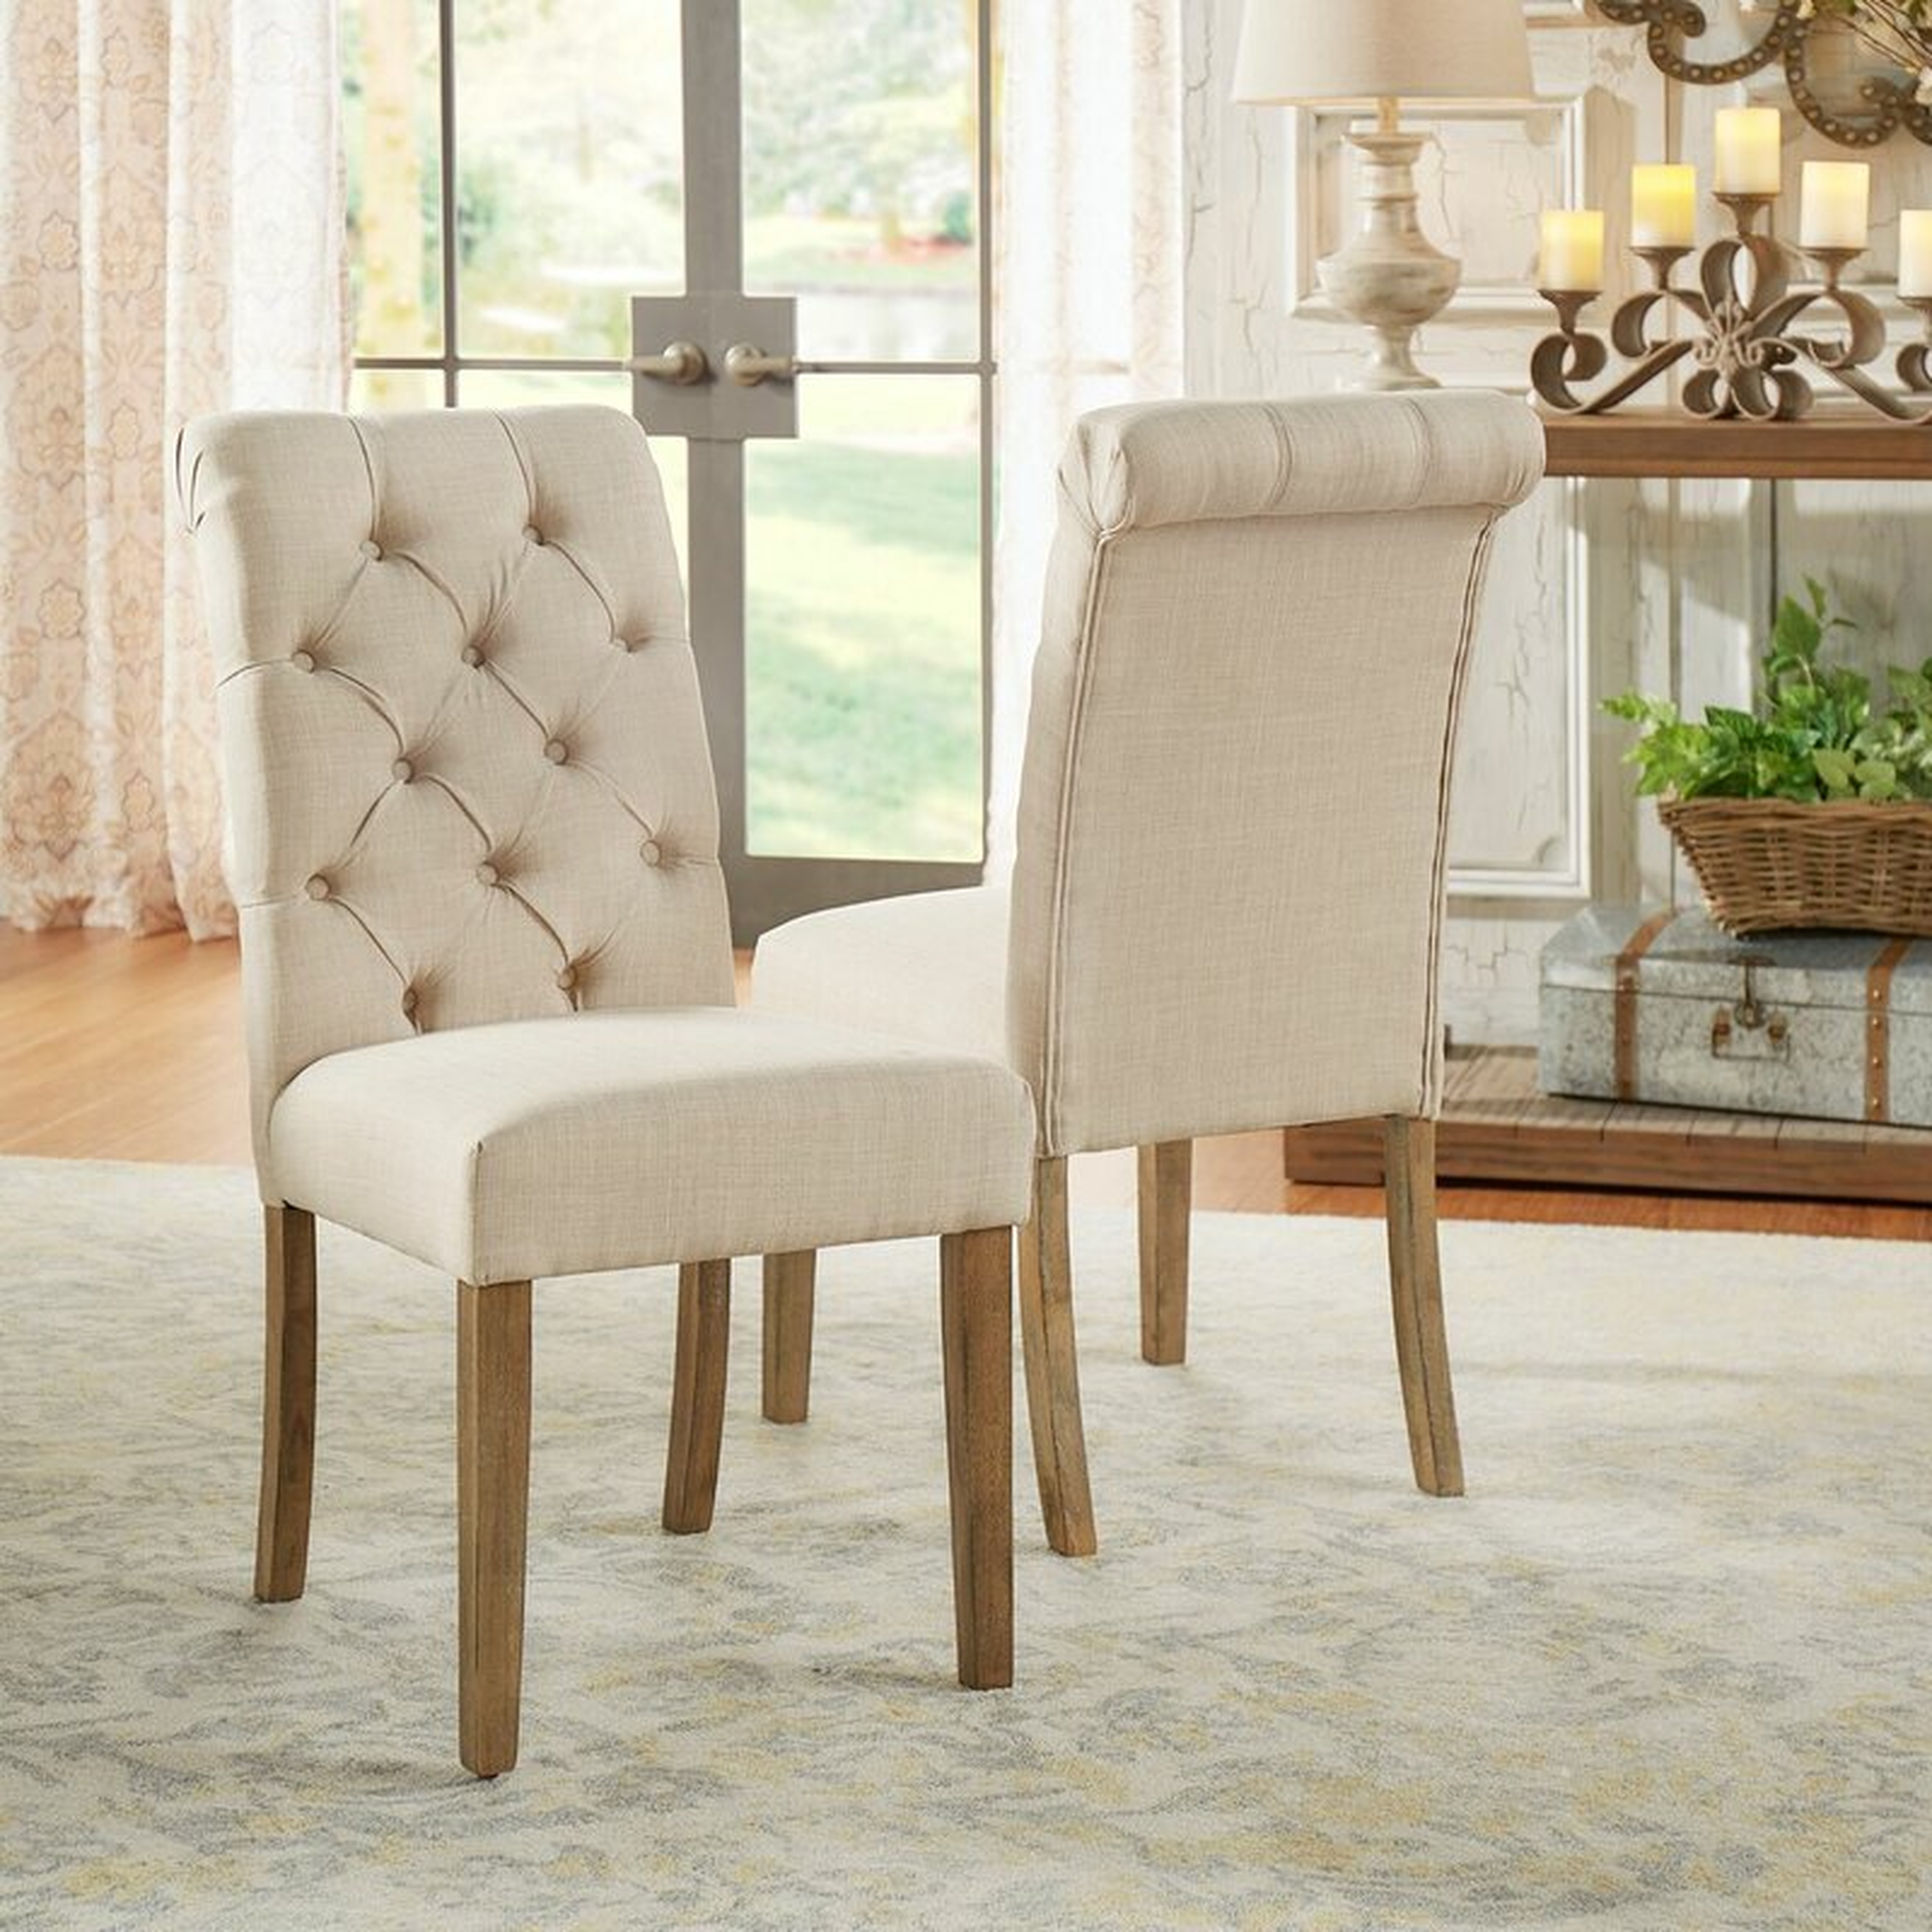 Abasi Tufted Upholstered Side Chair (Set of 2) - Wayfair